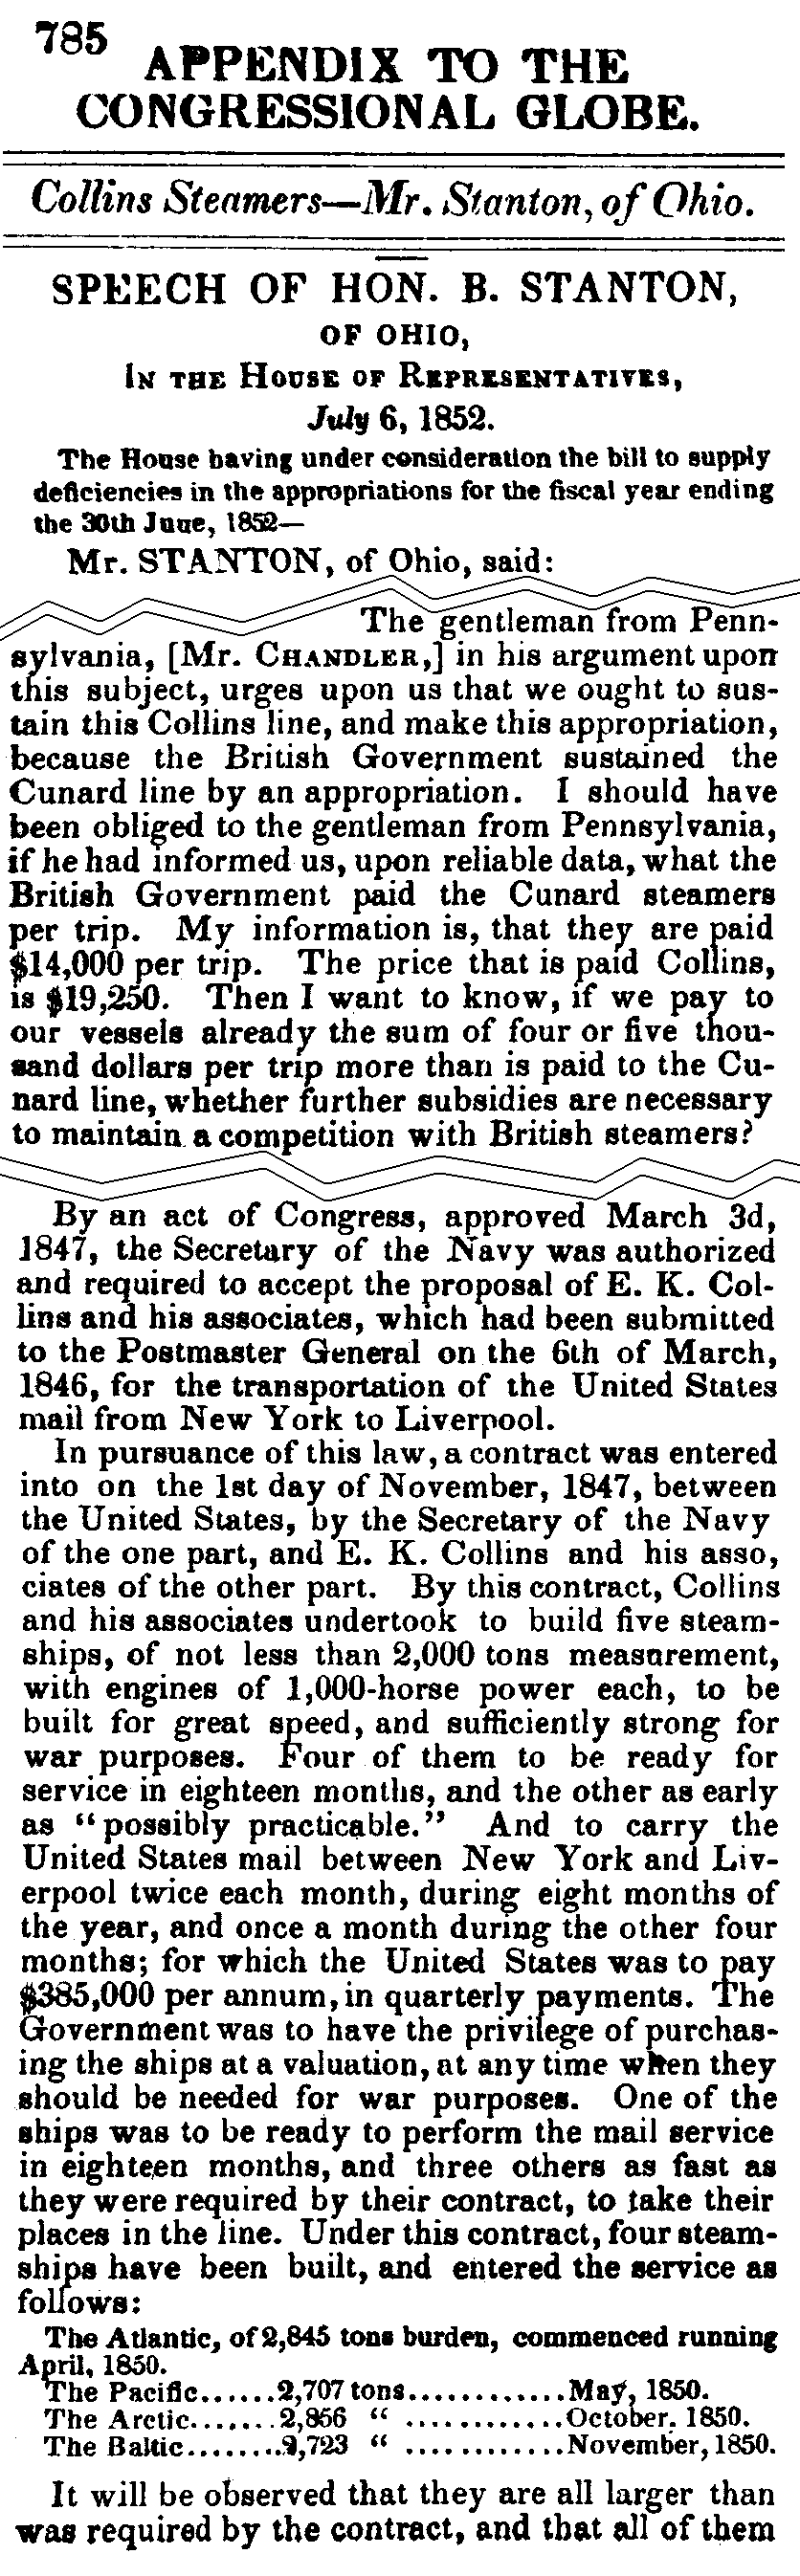 July 6, 1852: history of the Collins line from B. Stanton's speech, page 785 column 2